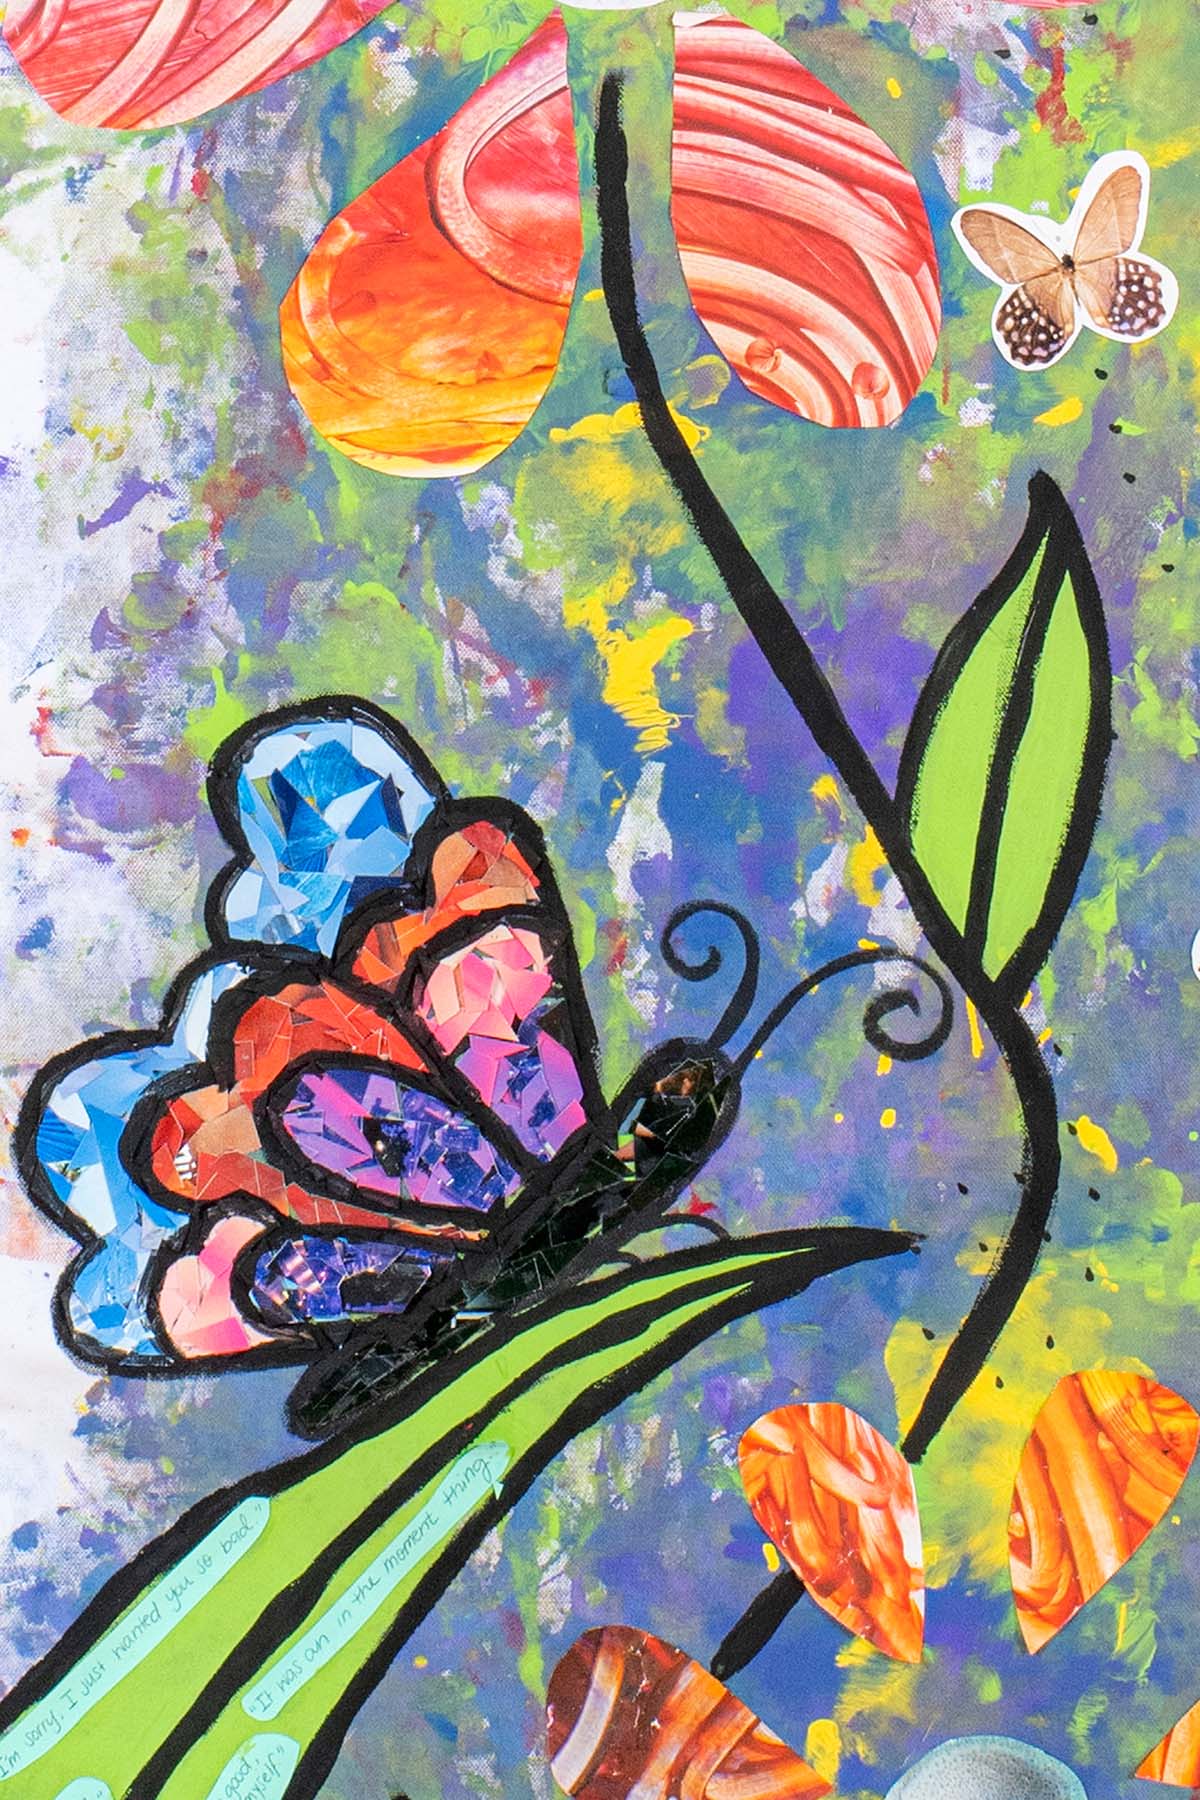 A close-up photograph of a mixed media art piece depicting a colorful butterfly on a blad of grass next to a sprawling flower